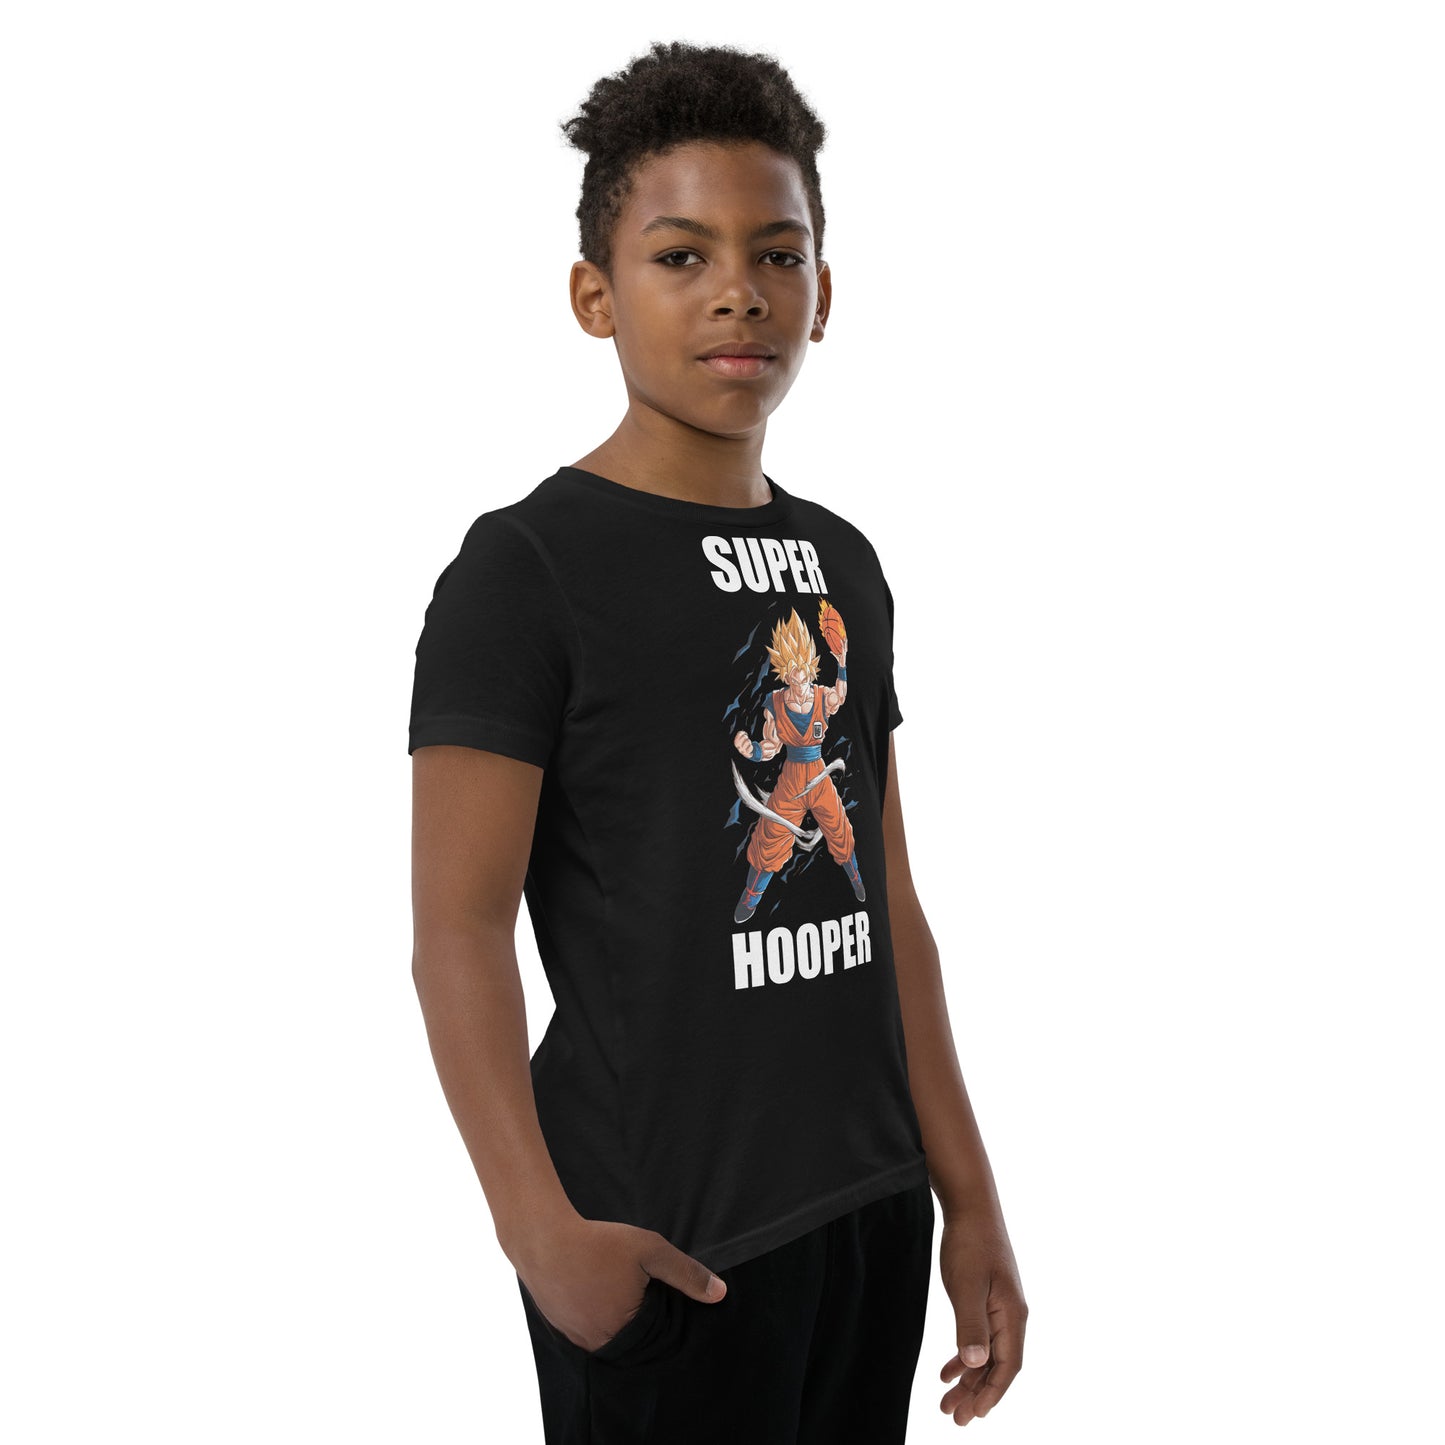 Super Hooper Youth Short Sleeve T-Shirt-Soft and Durable for All Kids